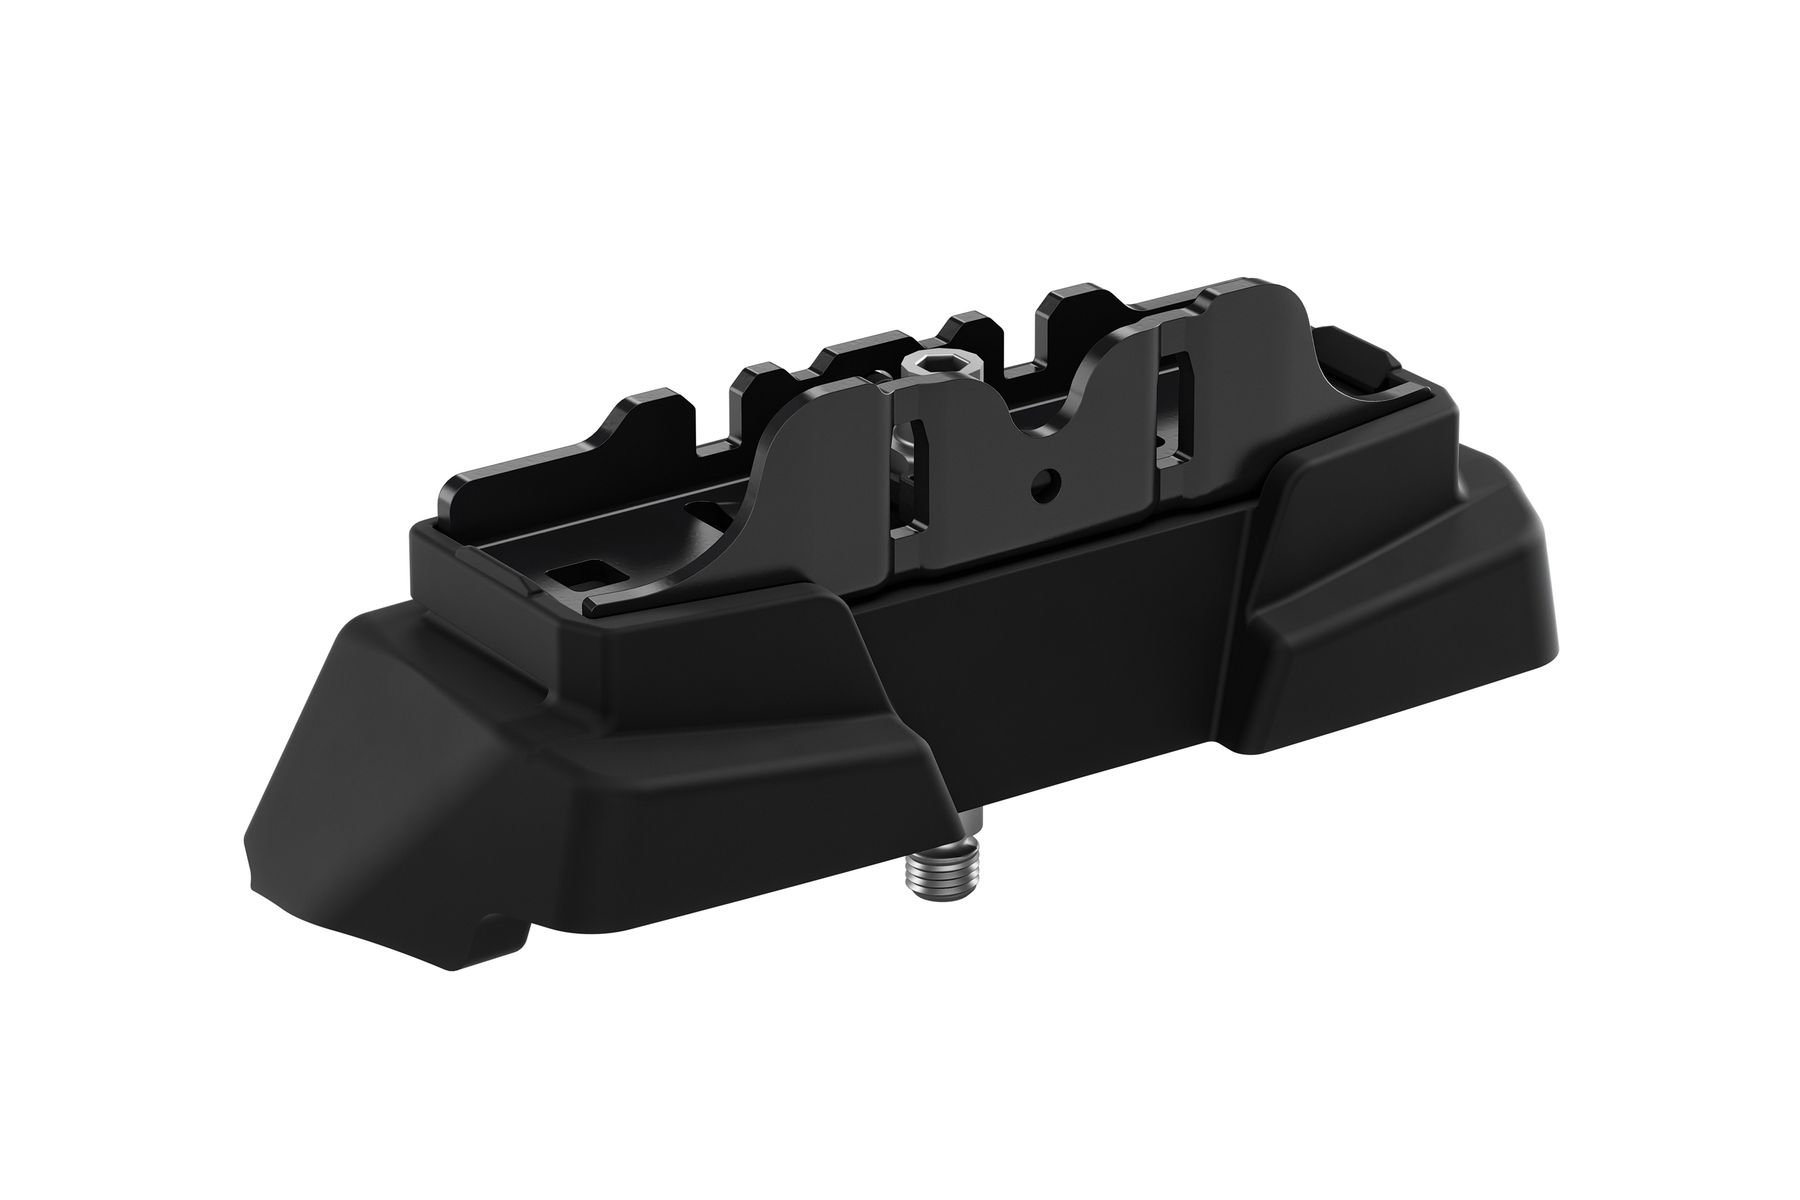 Thule Roof Rack System Fit Kit